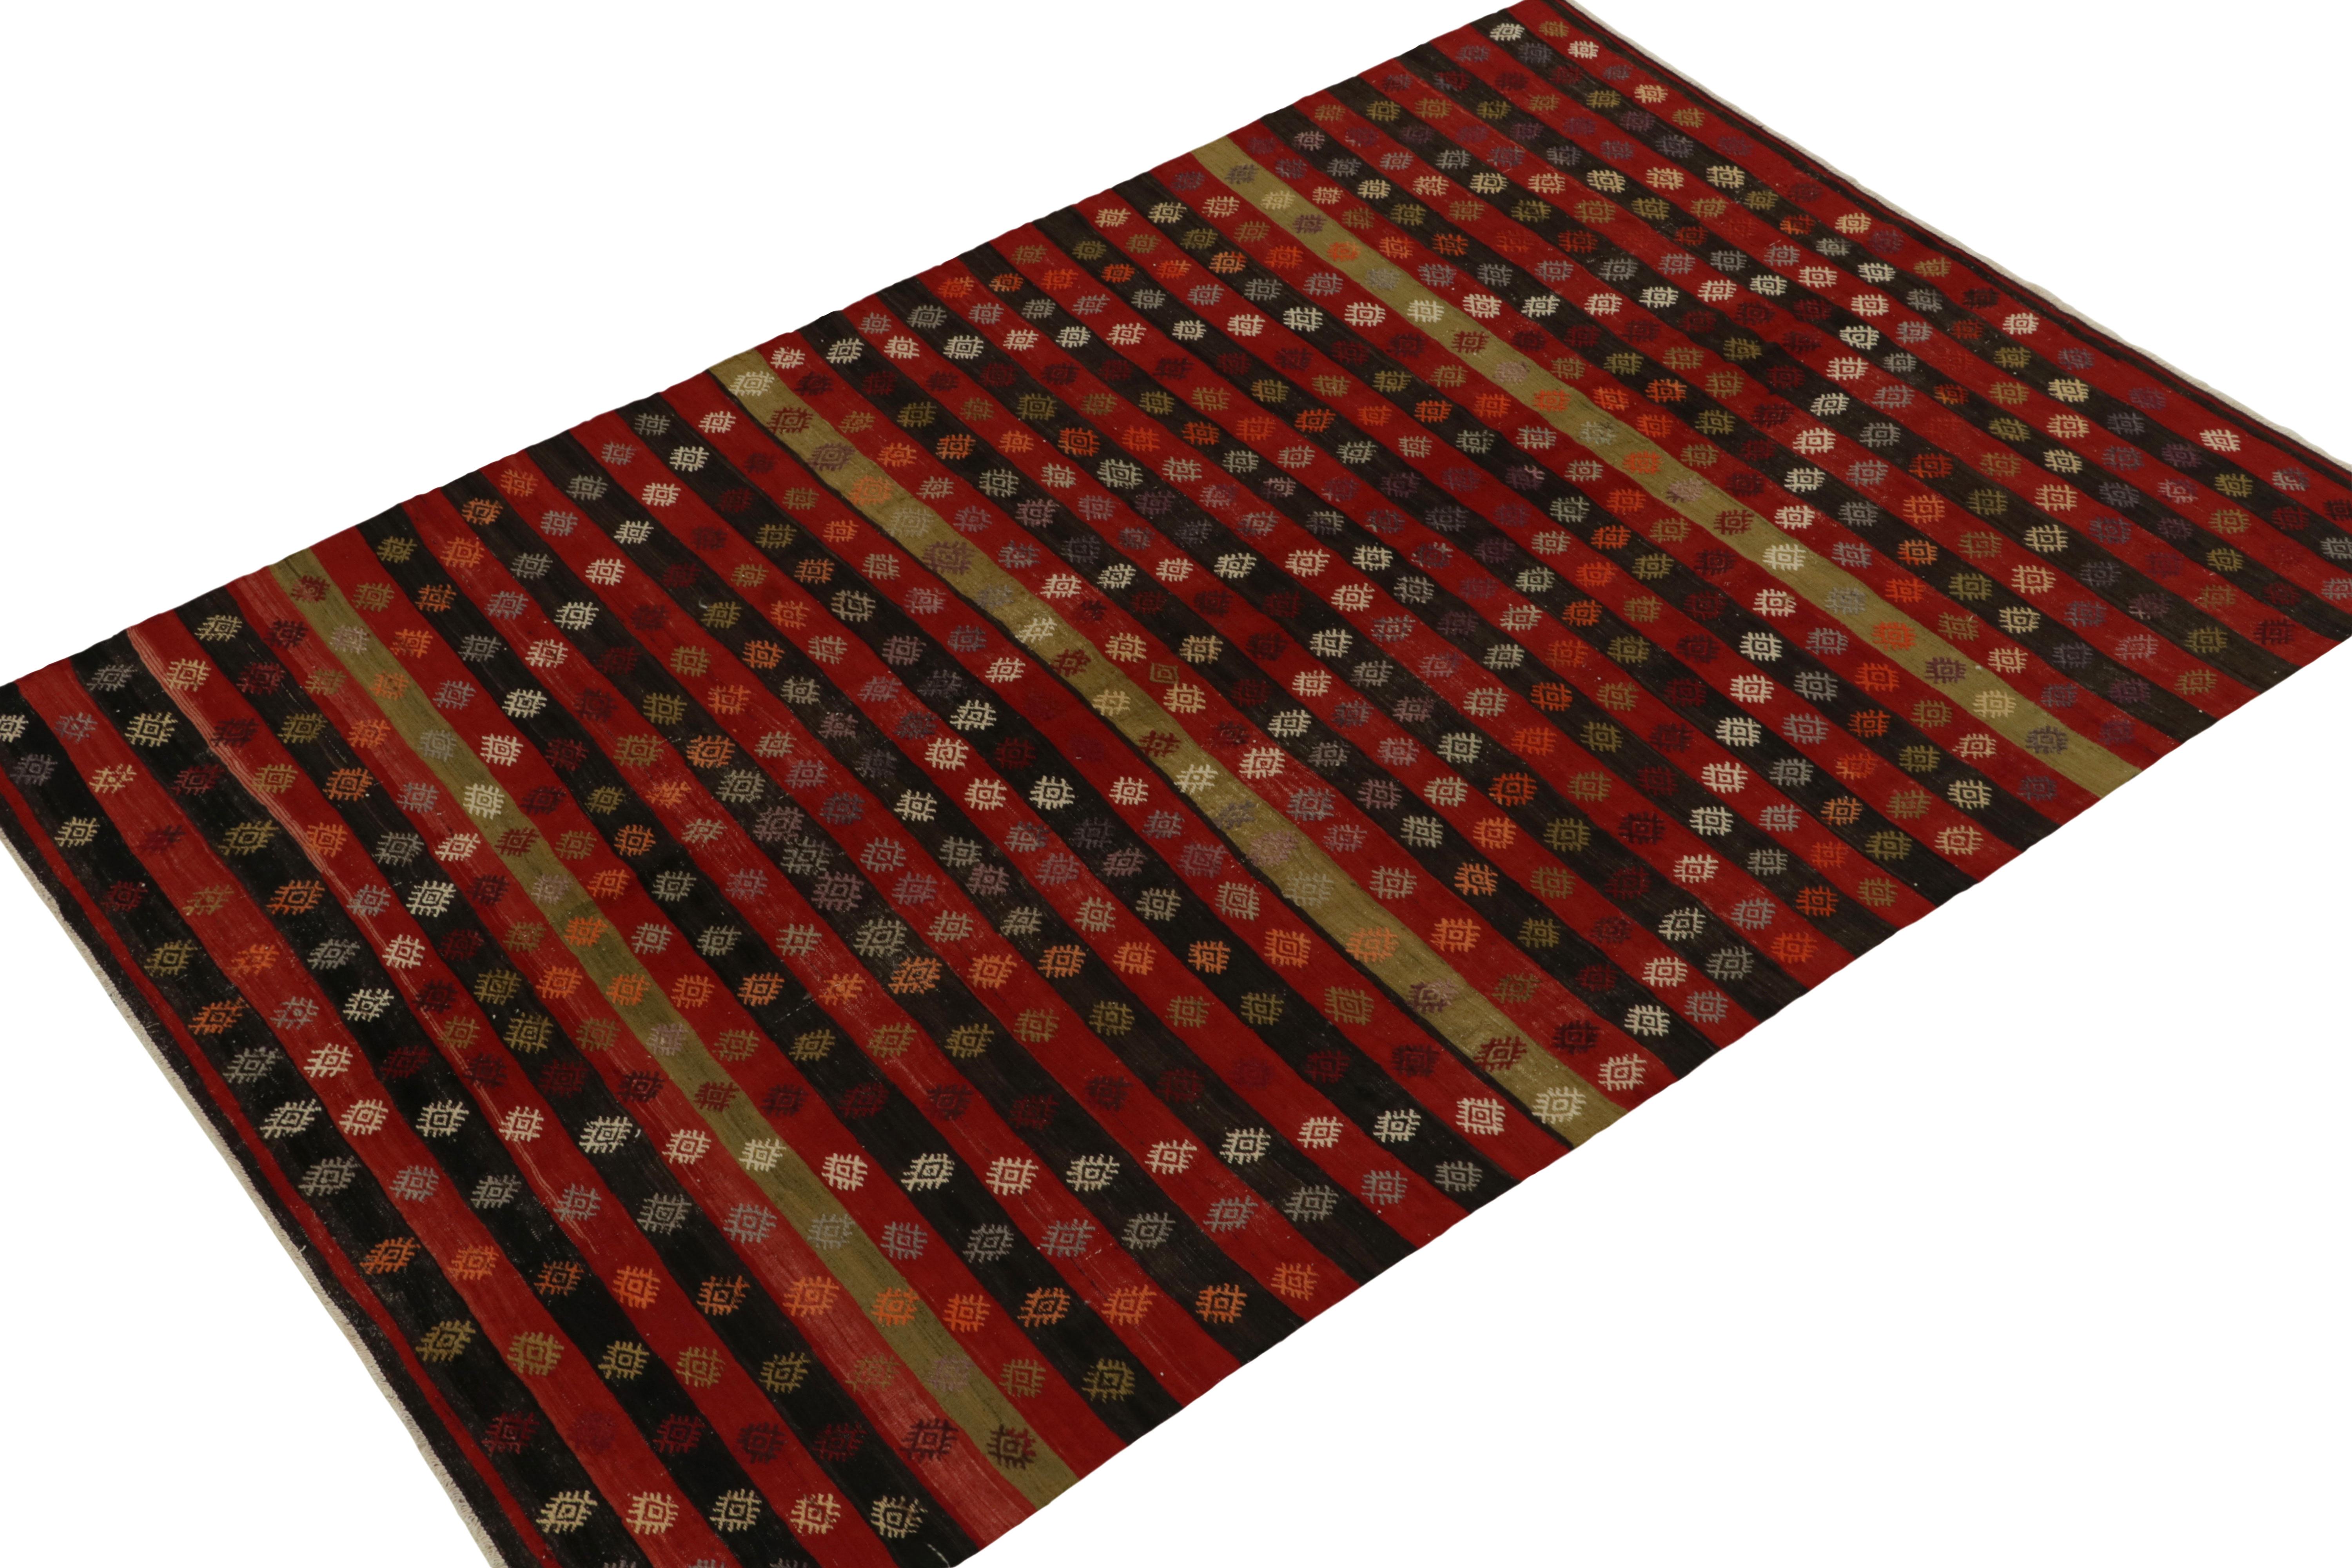 Impeccably hand woven in wool, this vintage kilim rug originates from Turkey circa 1940-1950. The 6x9 scale witnesses an outstanding marriage of embroidered patterns with subtle rarities like burdock symbols & rich tones of brown-black, red, green &